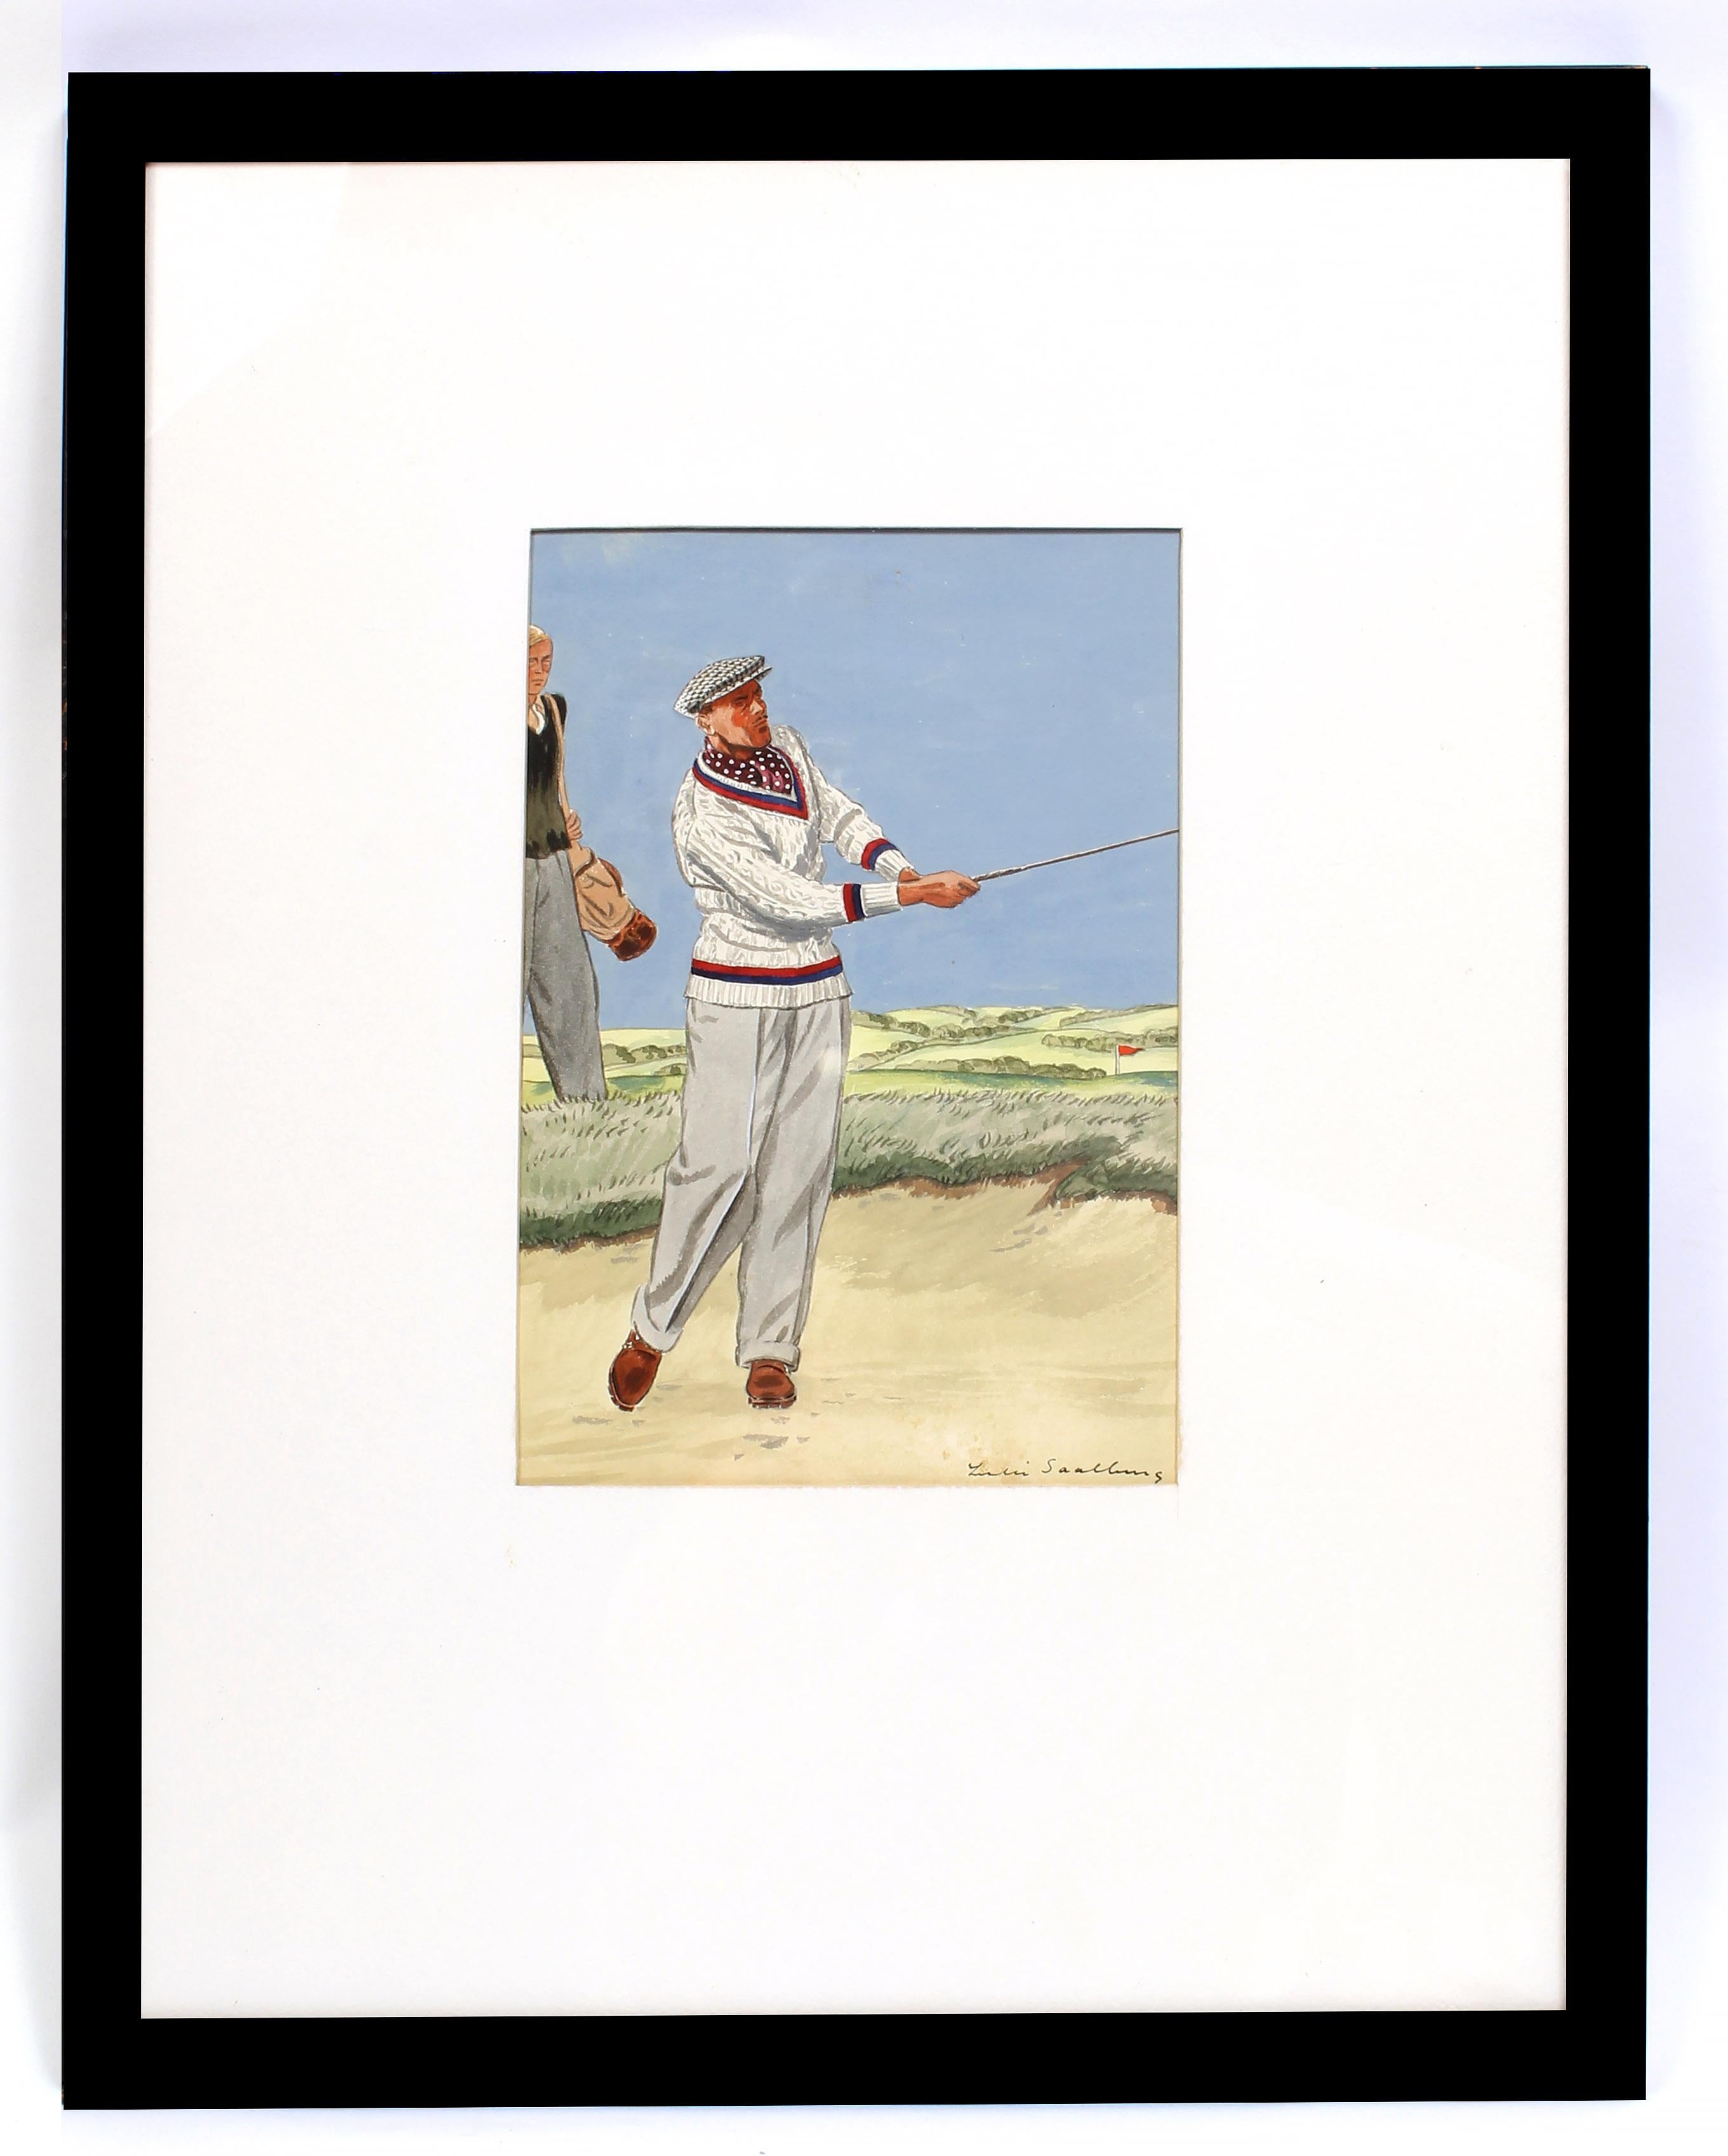 Antique Illustration of a Golfer by Listed Illustrator for Vanity Fair - Realist Painting by Leslie Saalburg